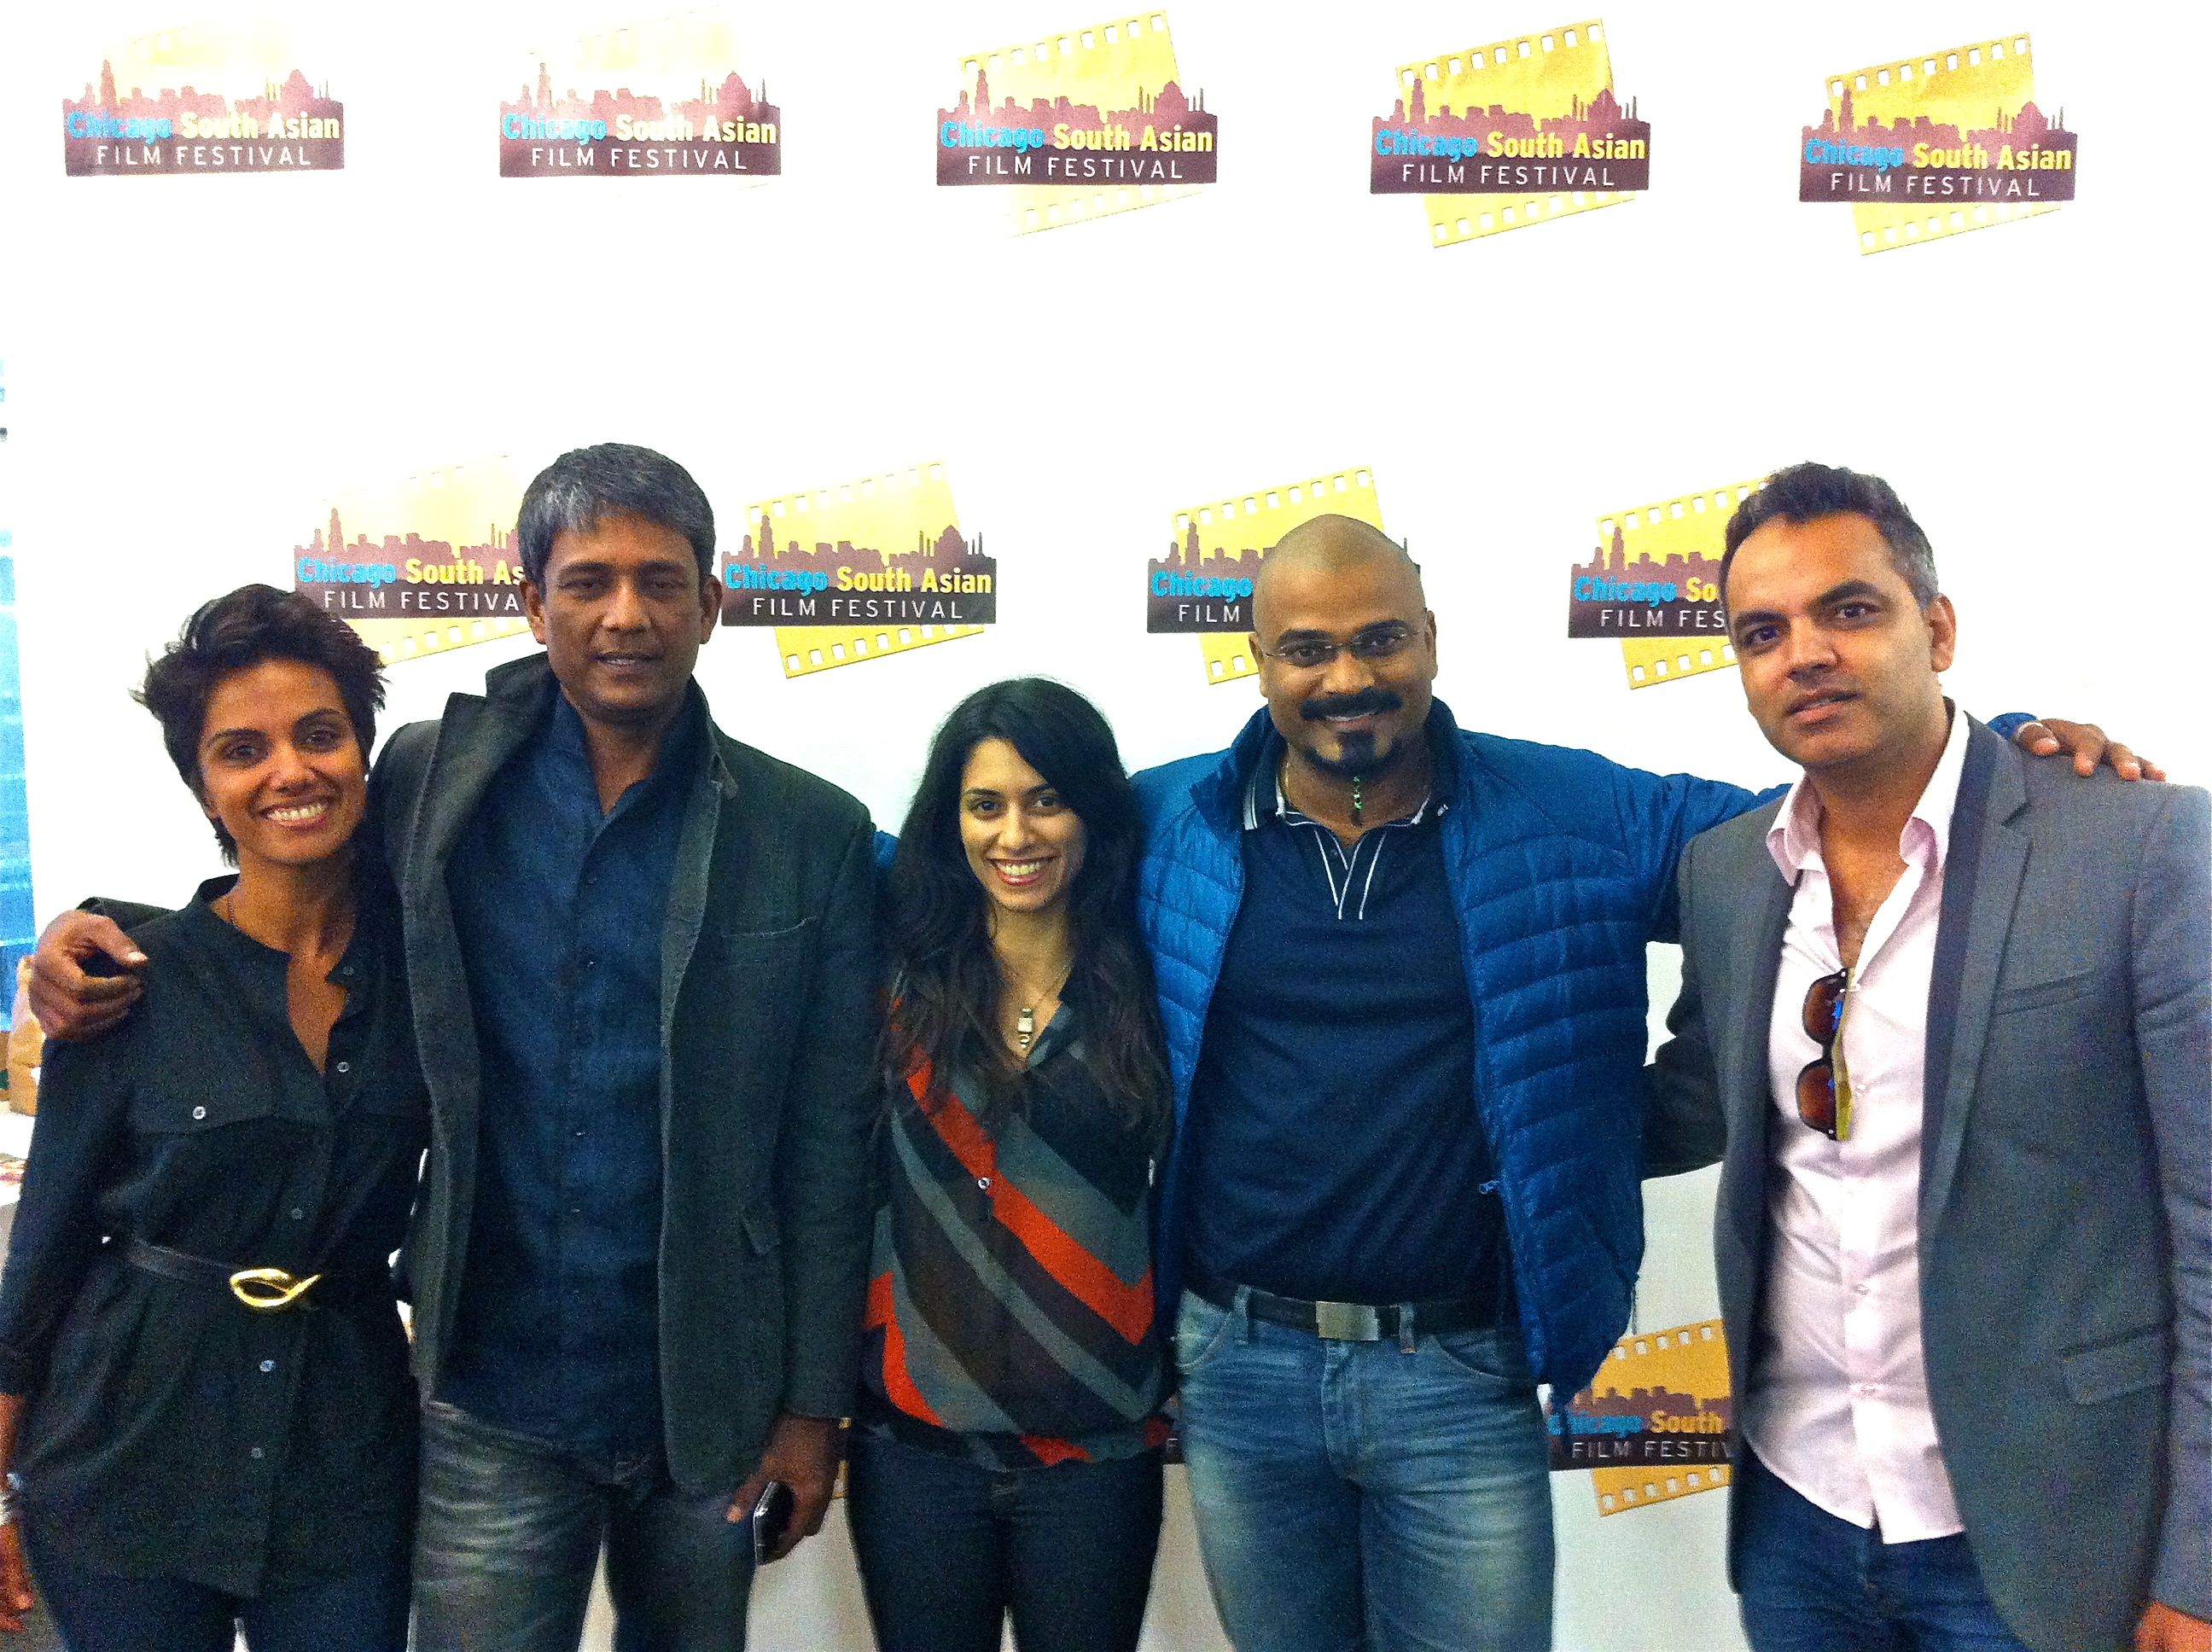 At the premiere of Doggoned, at Chicago's CSAFF 2012.